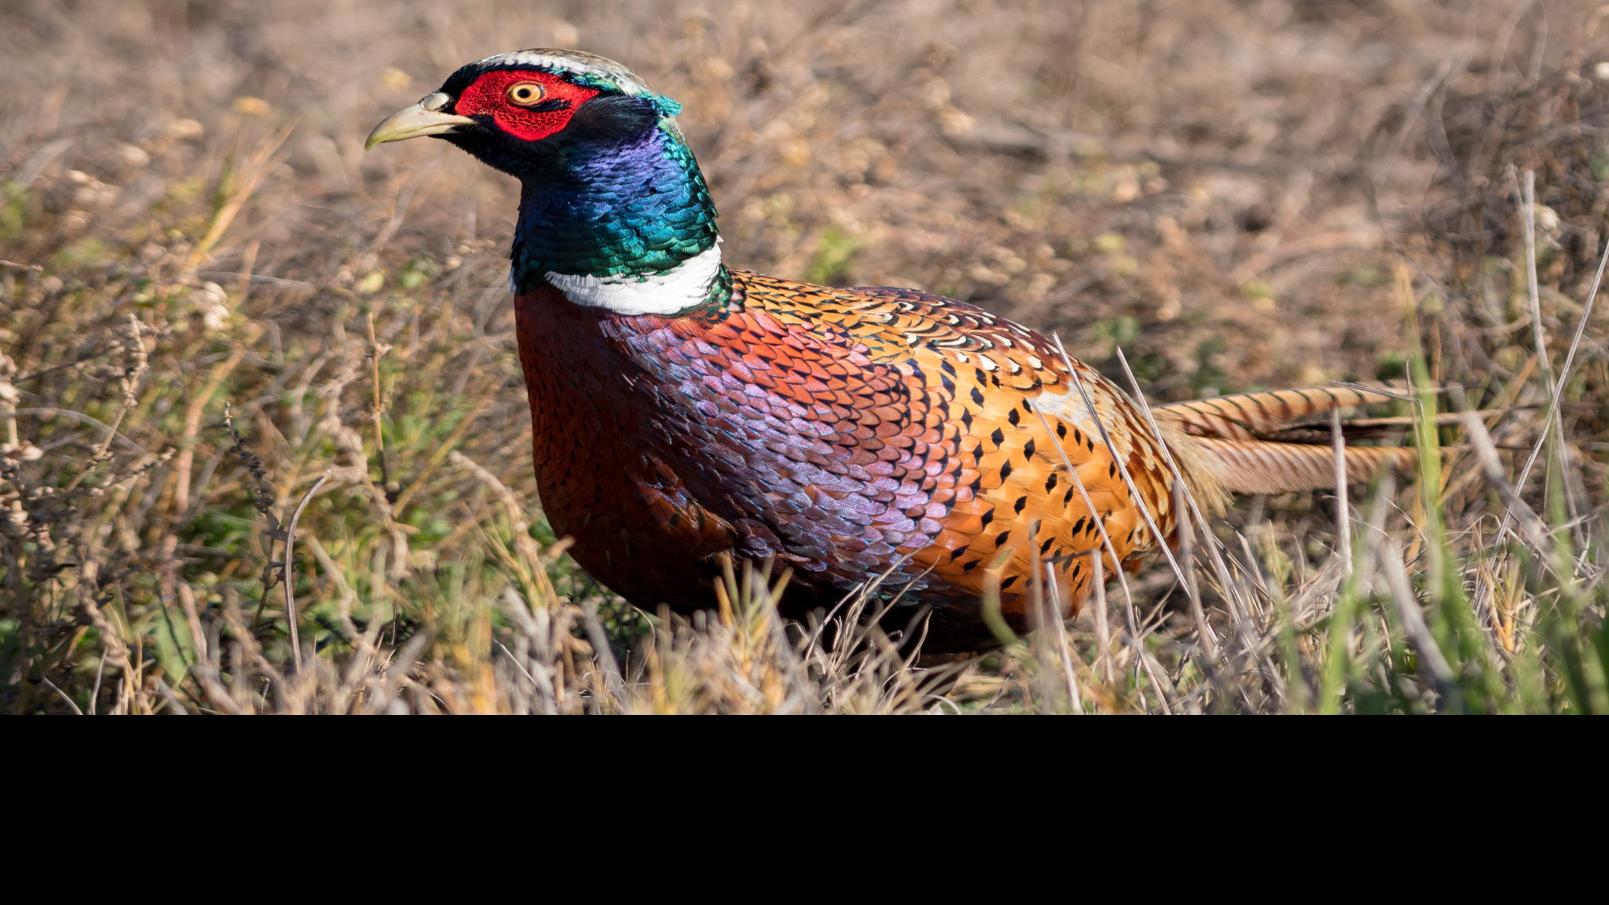 A Tale Of Two Disappearing Pheasants